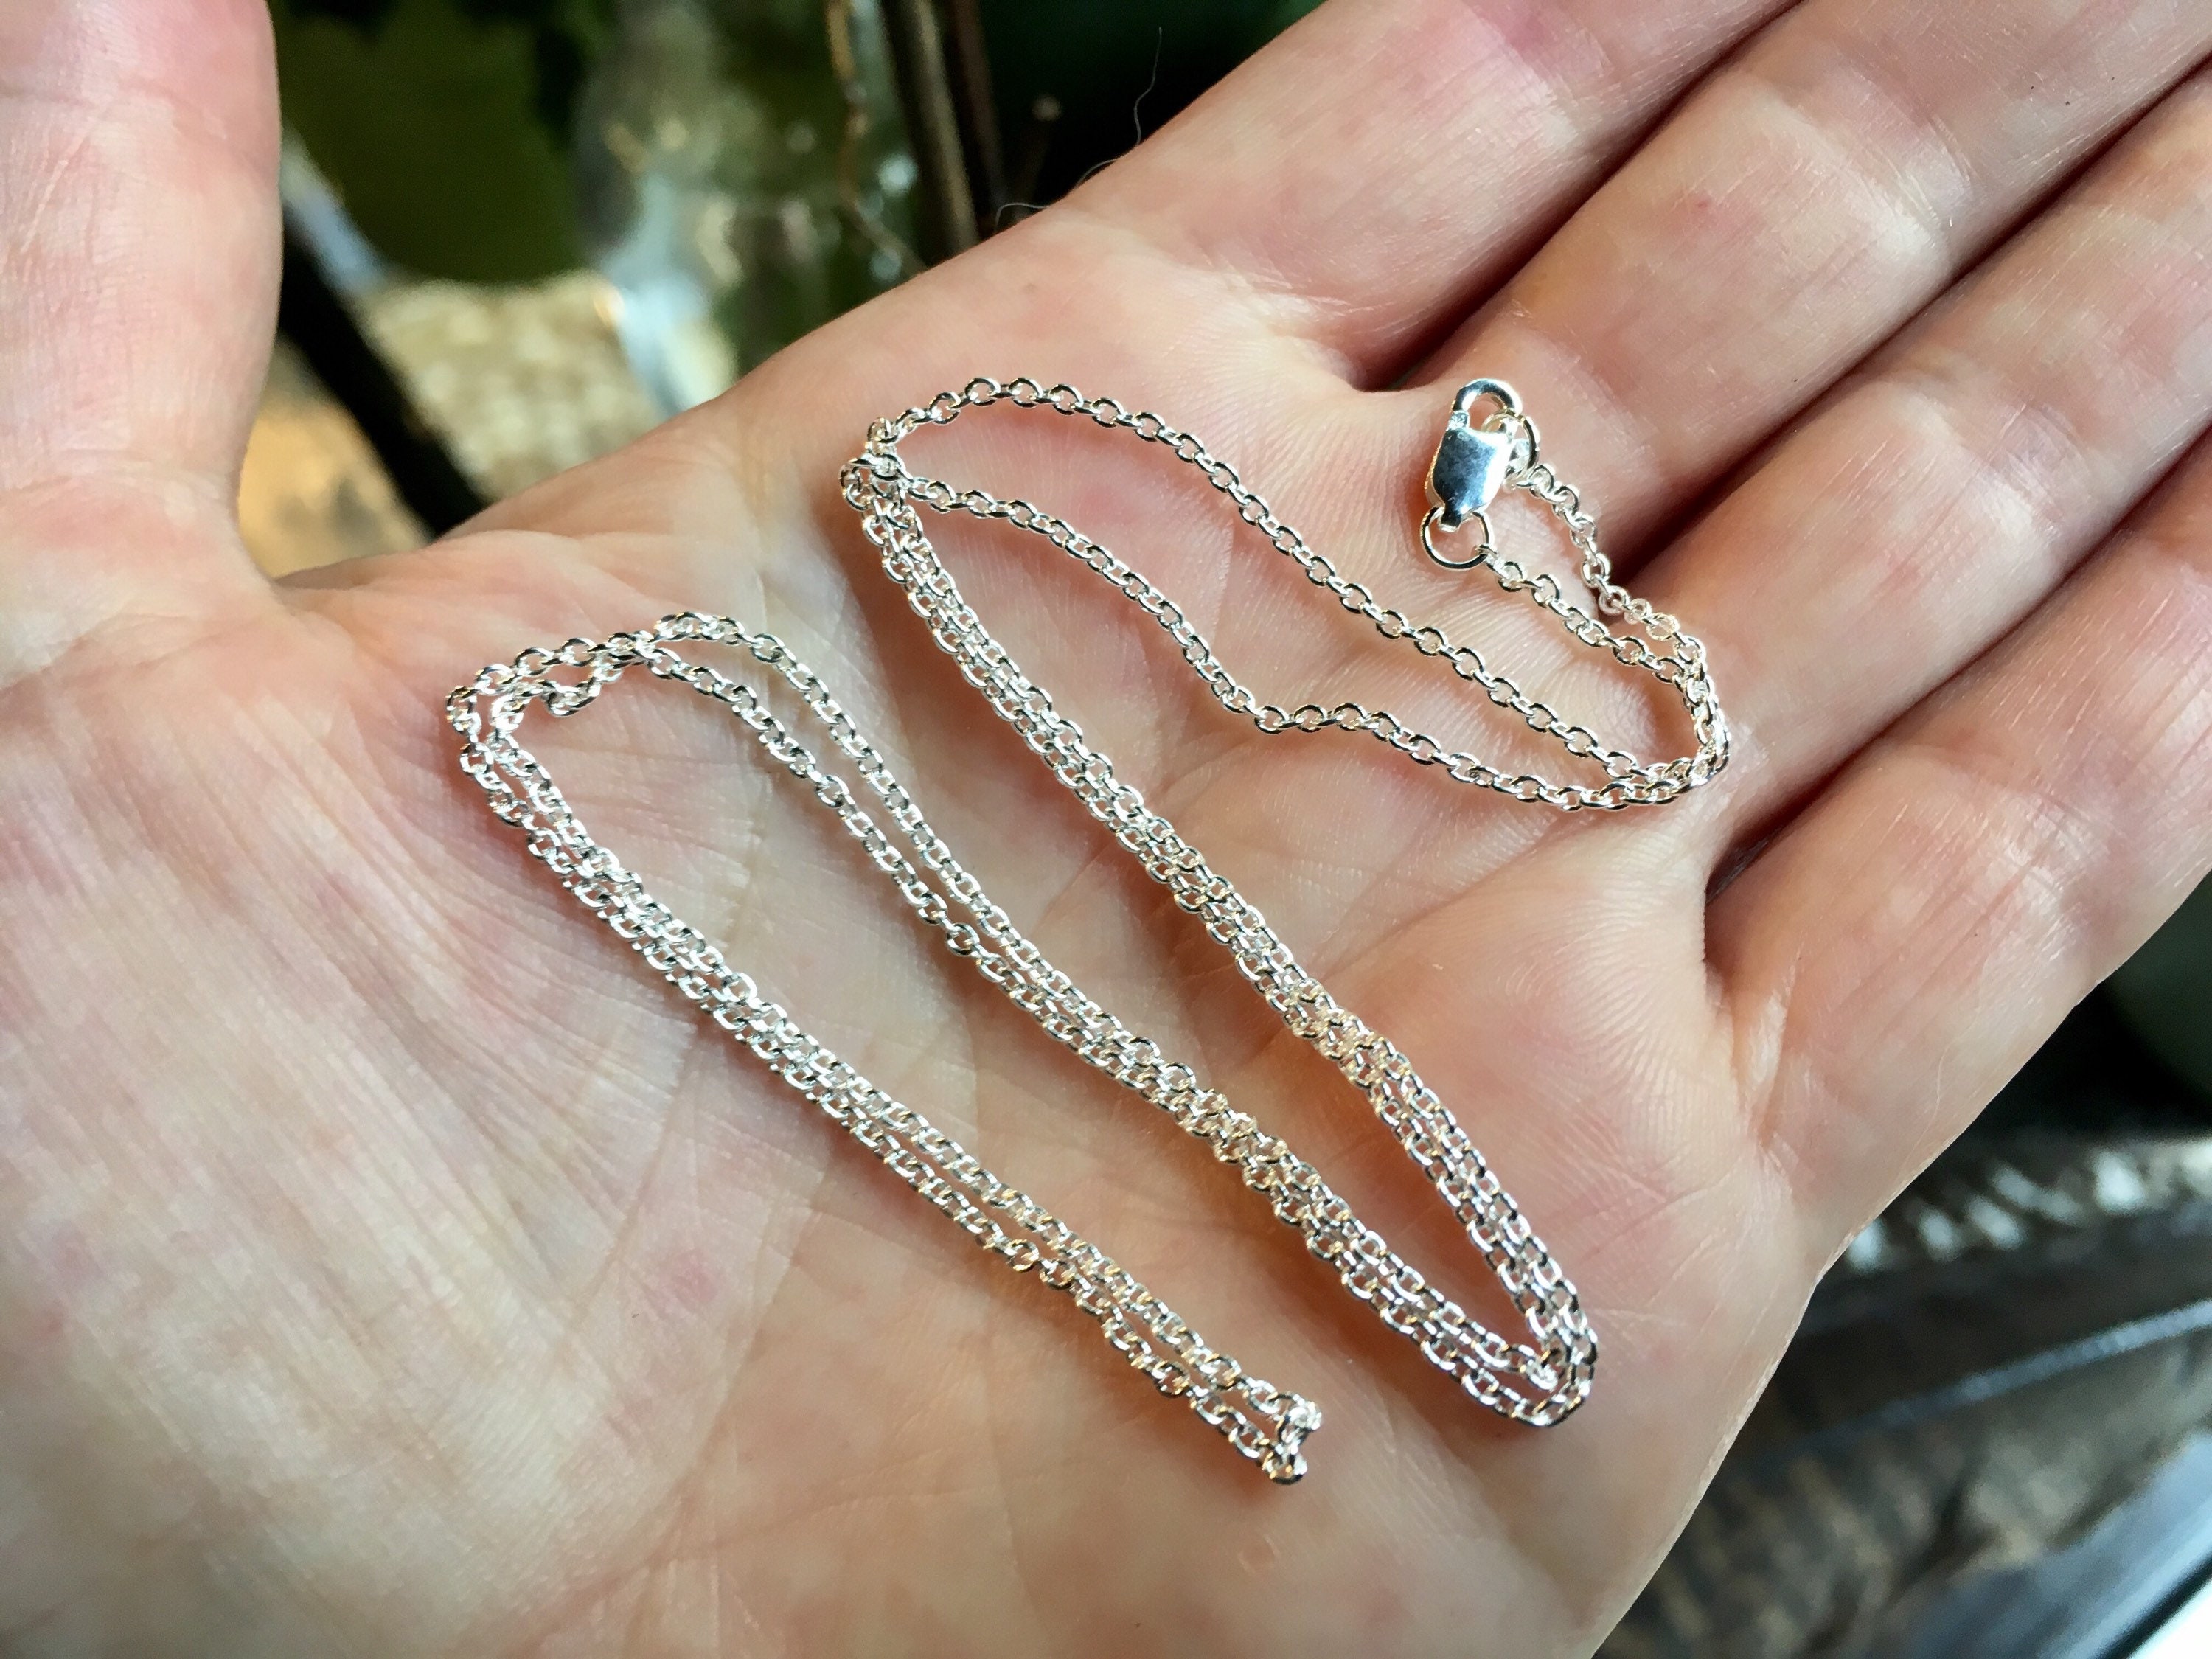 1.5mm Cable Chain Necklace, Recycled Sterling Silver